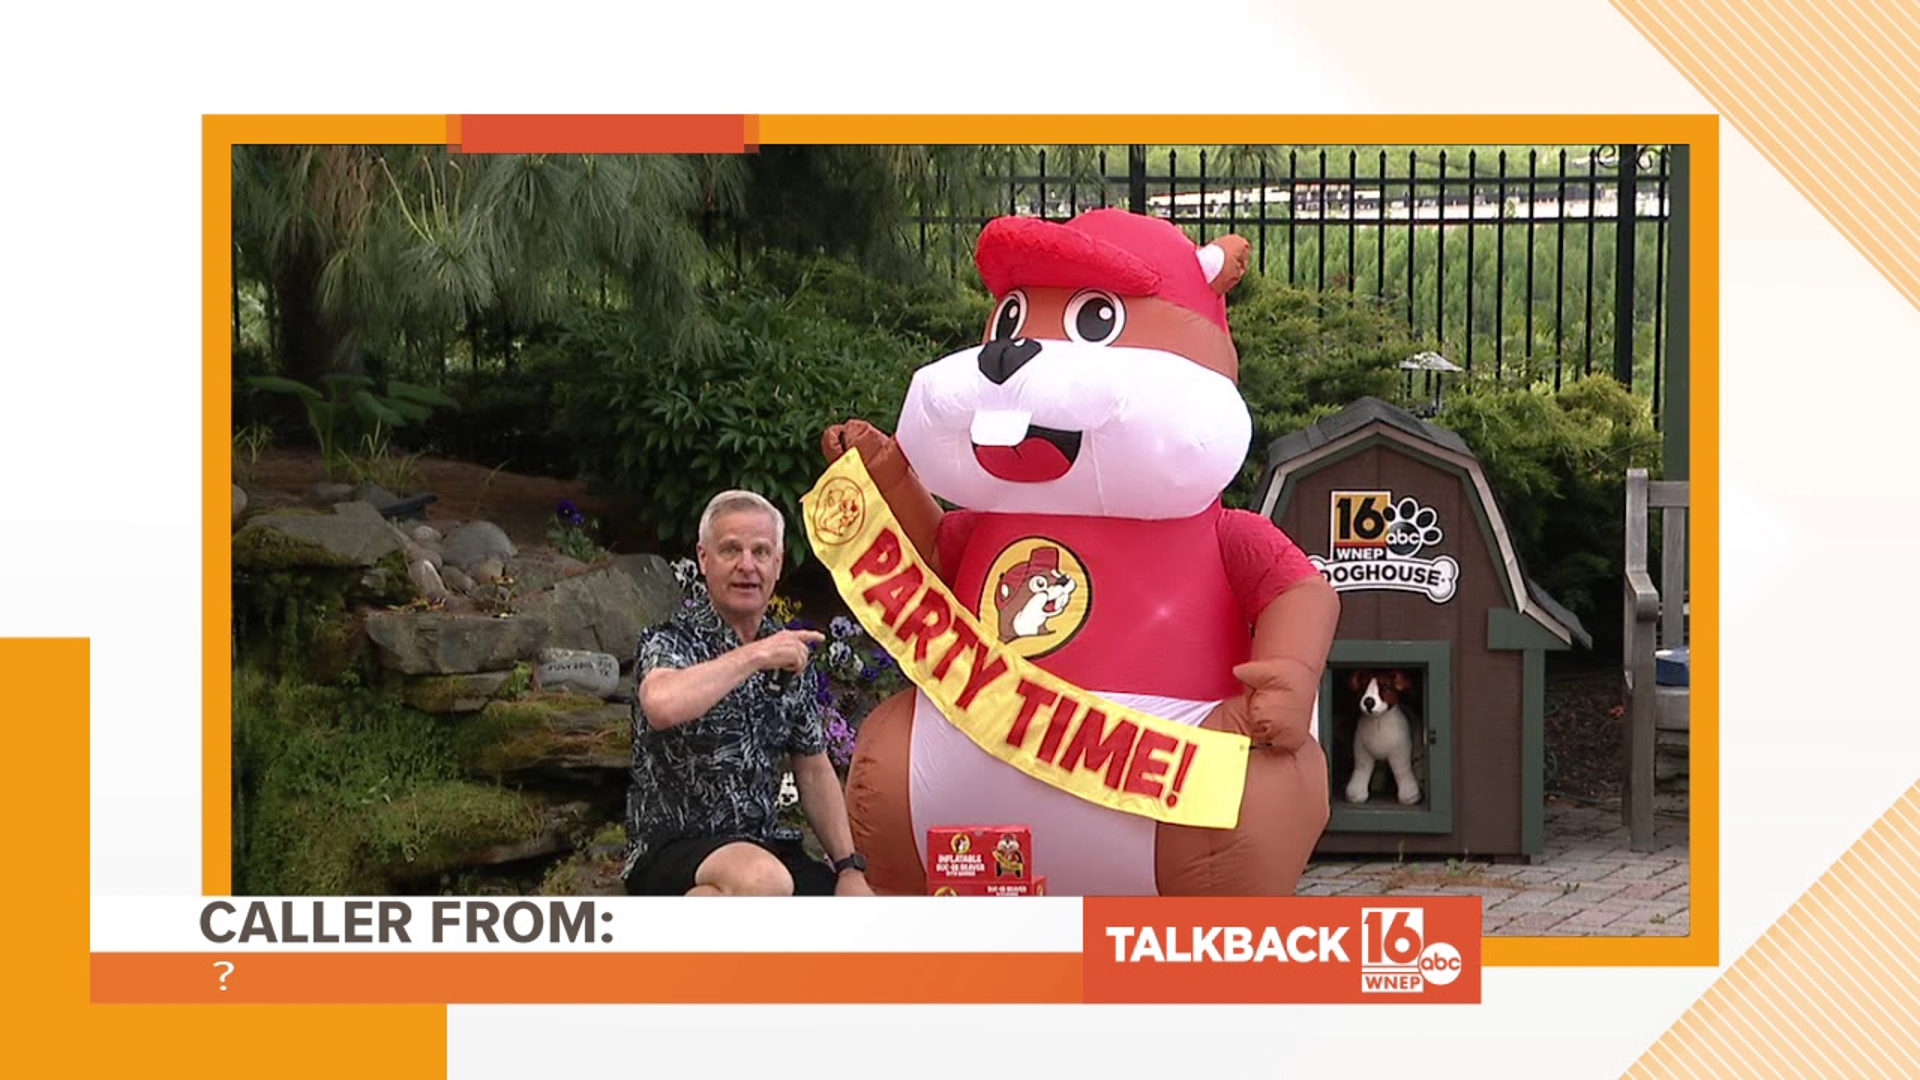 The newest inflatable in the WNEP backyard is blowing up the Talkback lines.